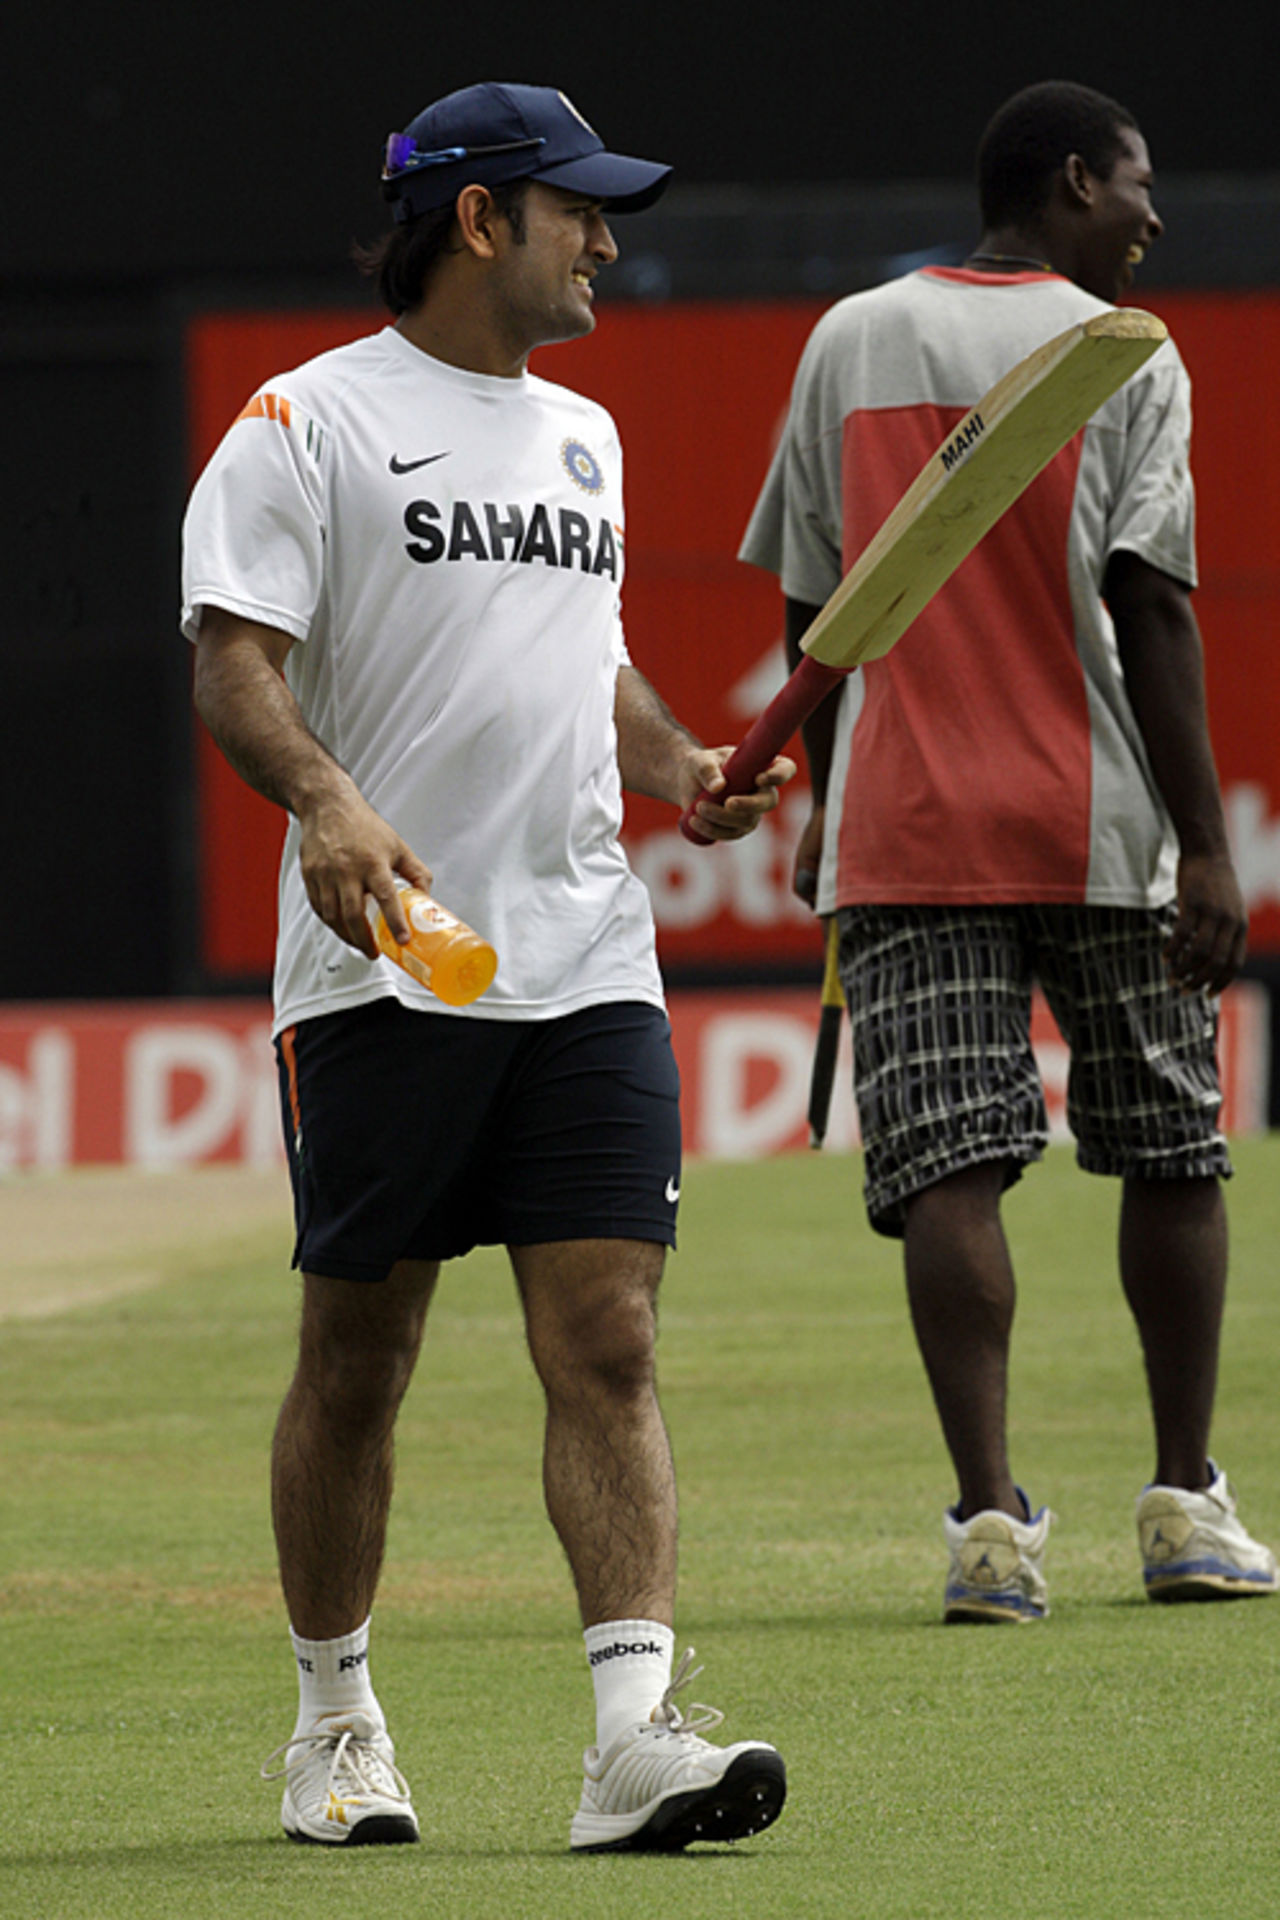 MS Dhoni in action at India's practice session, Gros Islet, St Lucia, July 2, 2009